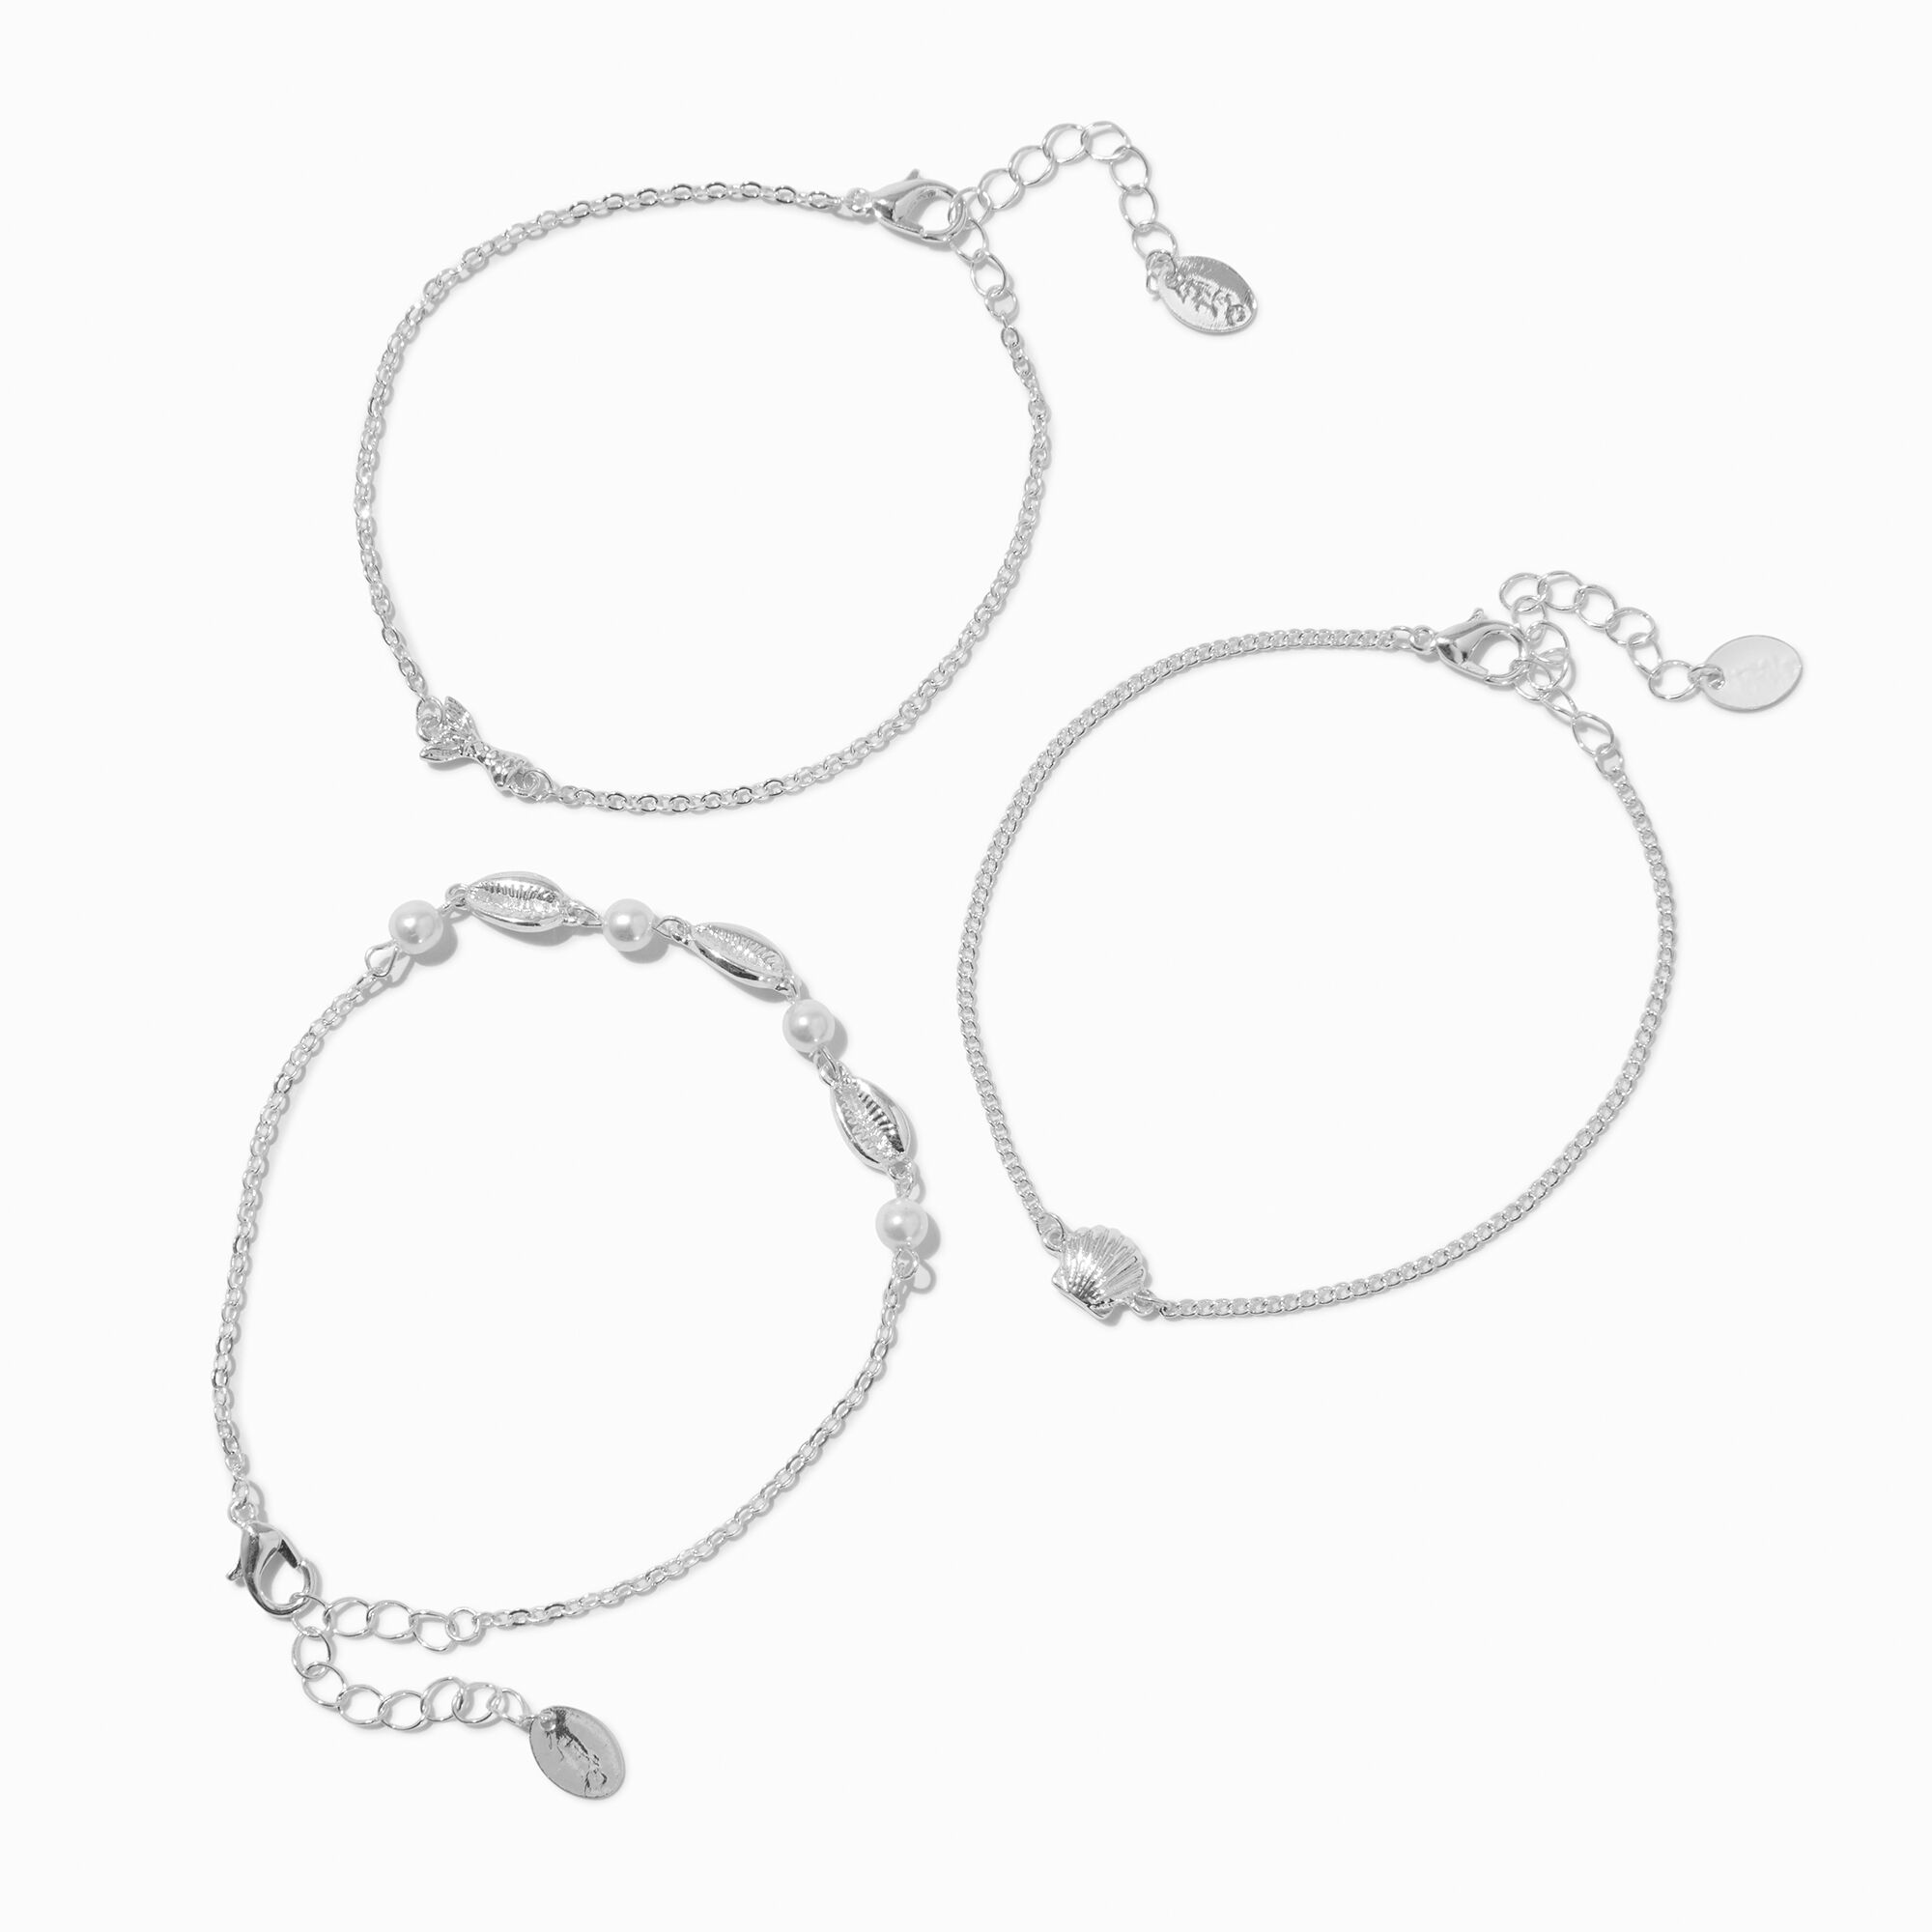 View Claires Club Tone Mermaid Anklets 3 Pack Silver information